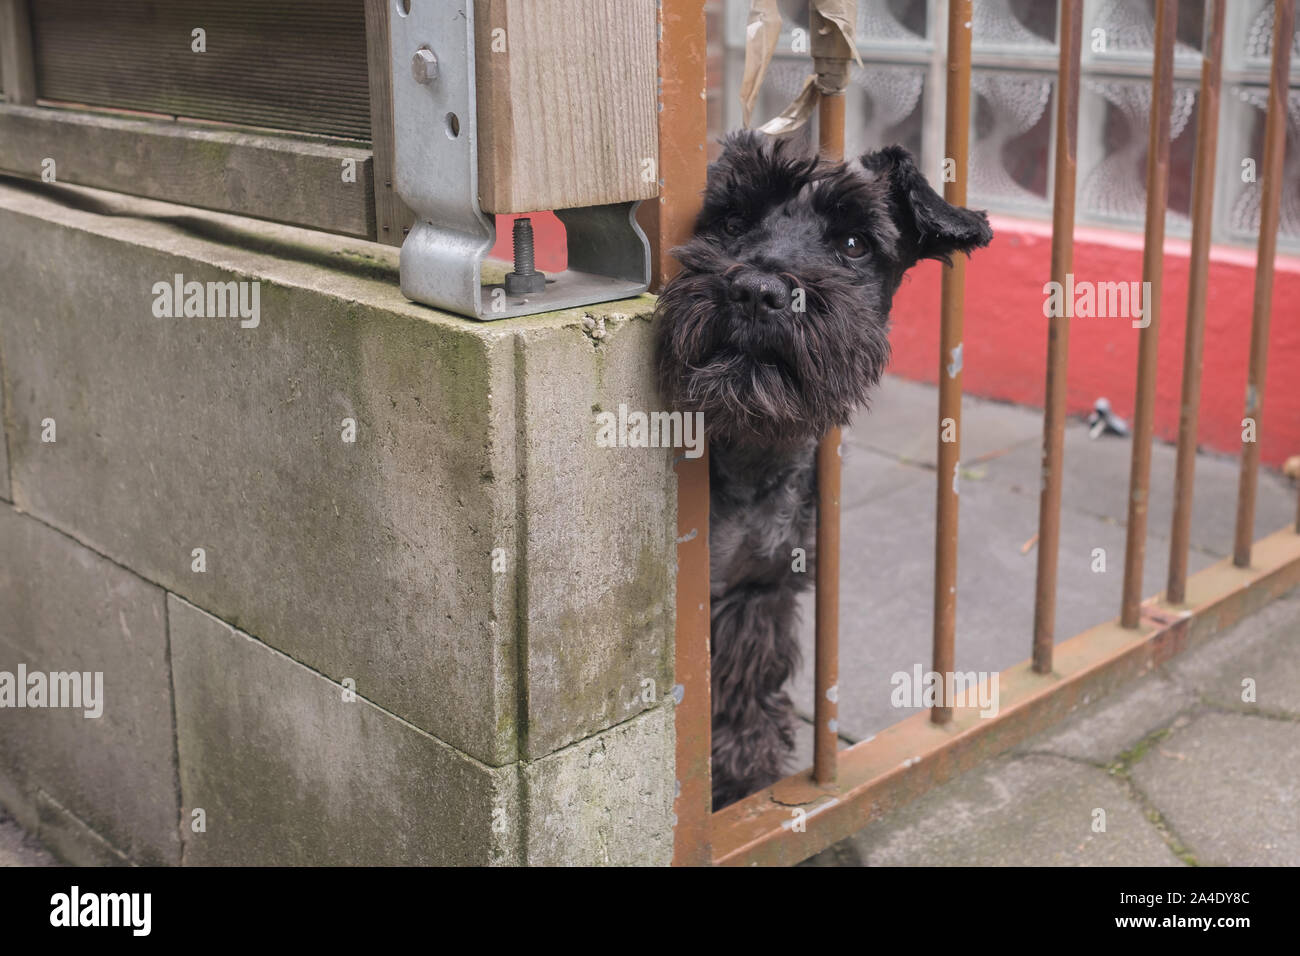 Cute small black dog behind fence waiting alone for his owner Stock Photo